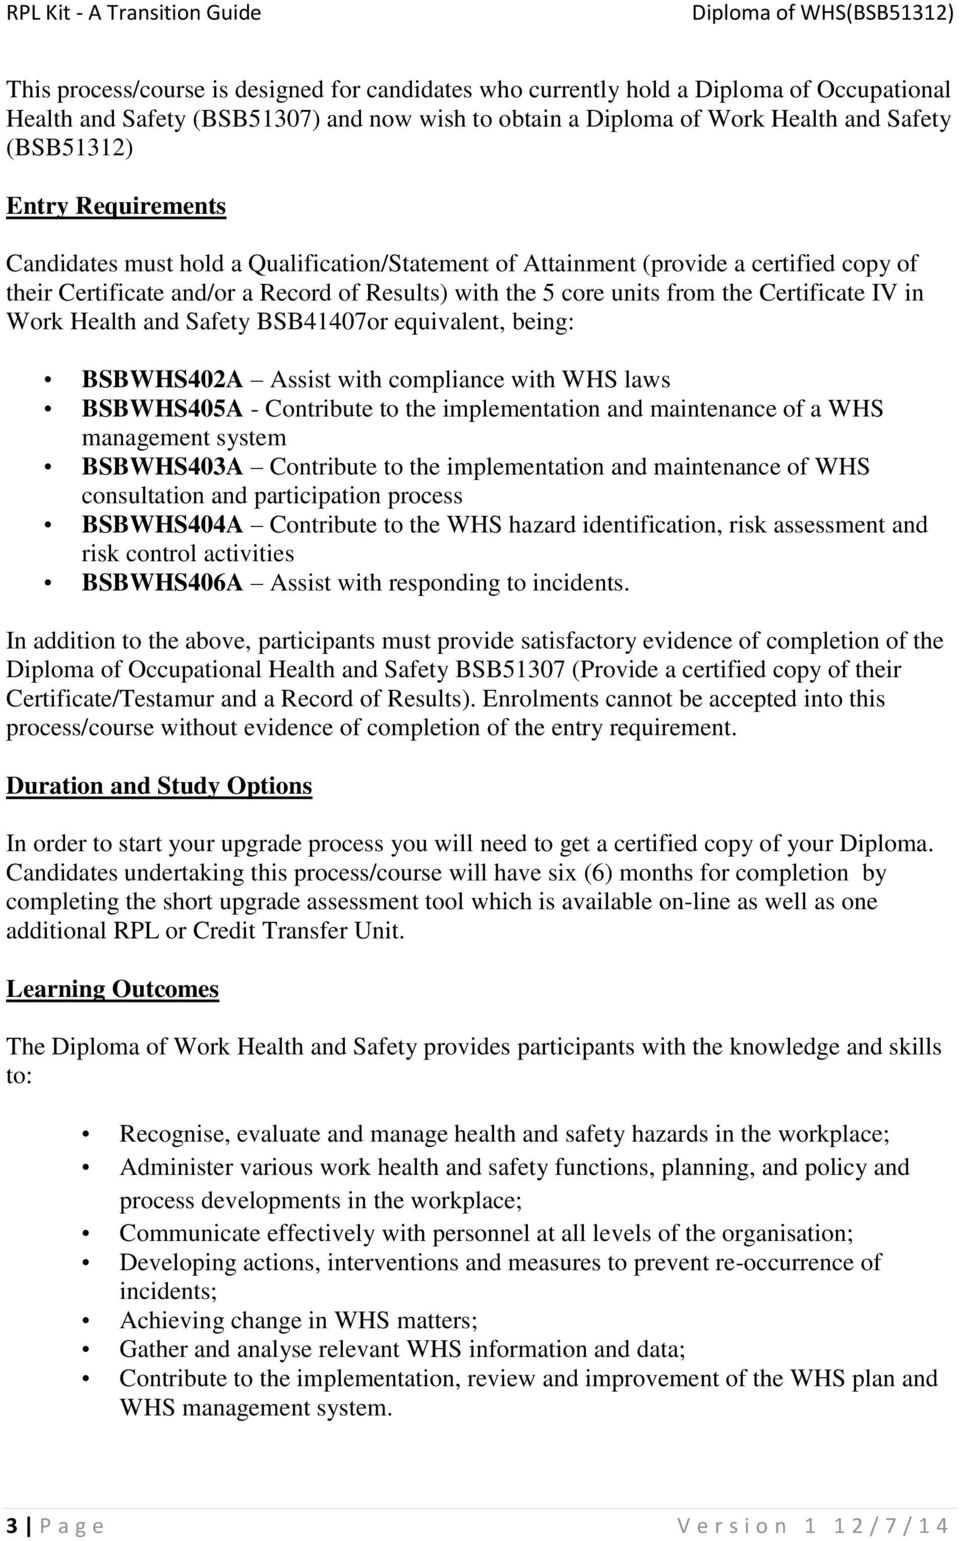 Work Health and Safety BSB41407or equivalent, being: BSBWHS402A Assist with compliance with WHS laws BSBWHS405A - Contribute to the implementation and maintenance of a WHS management system